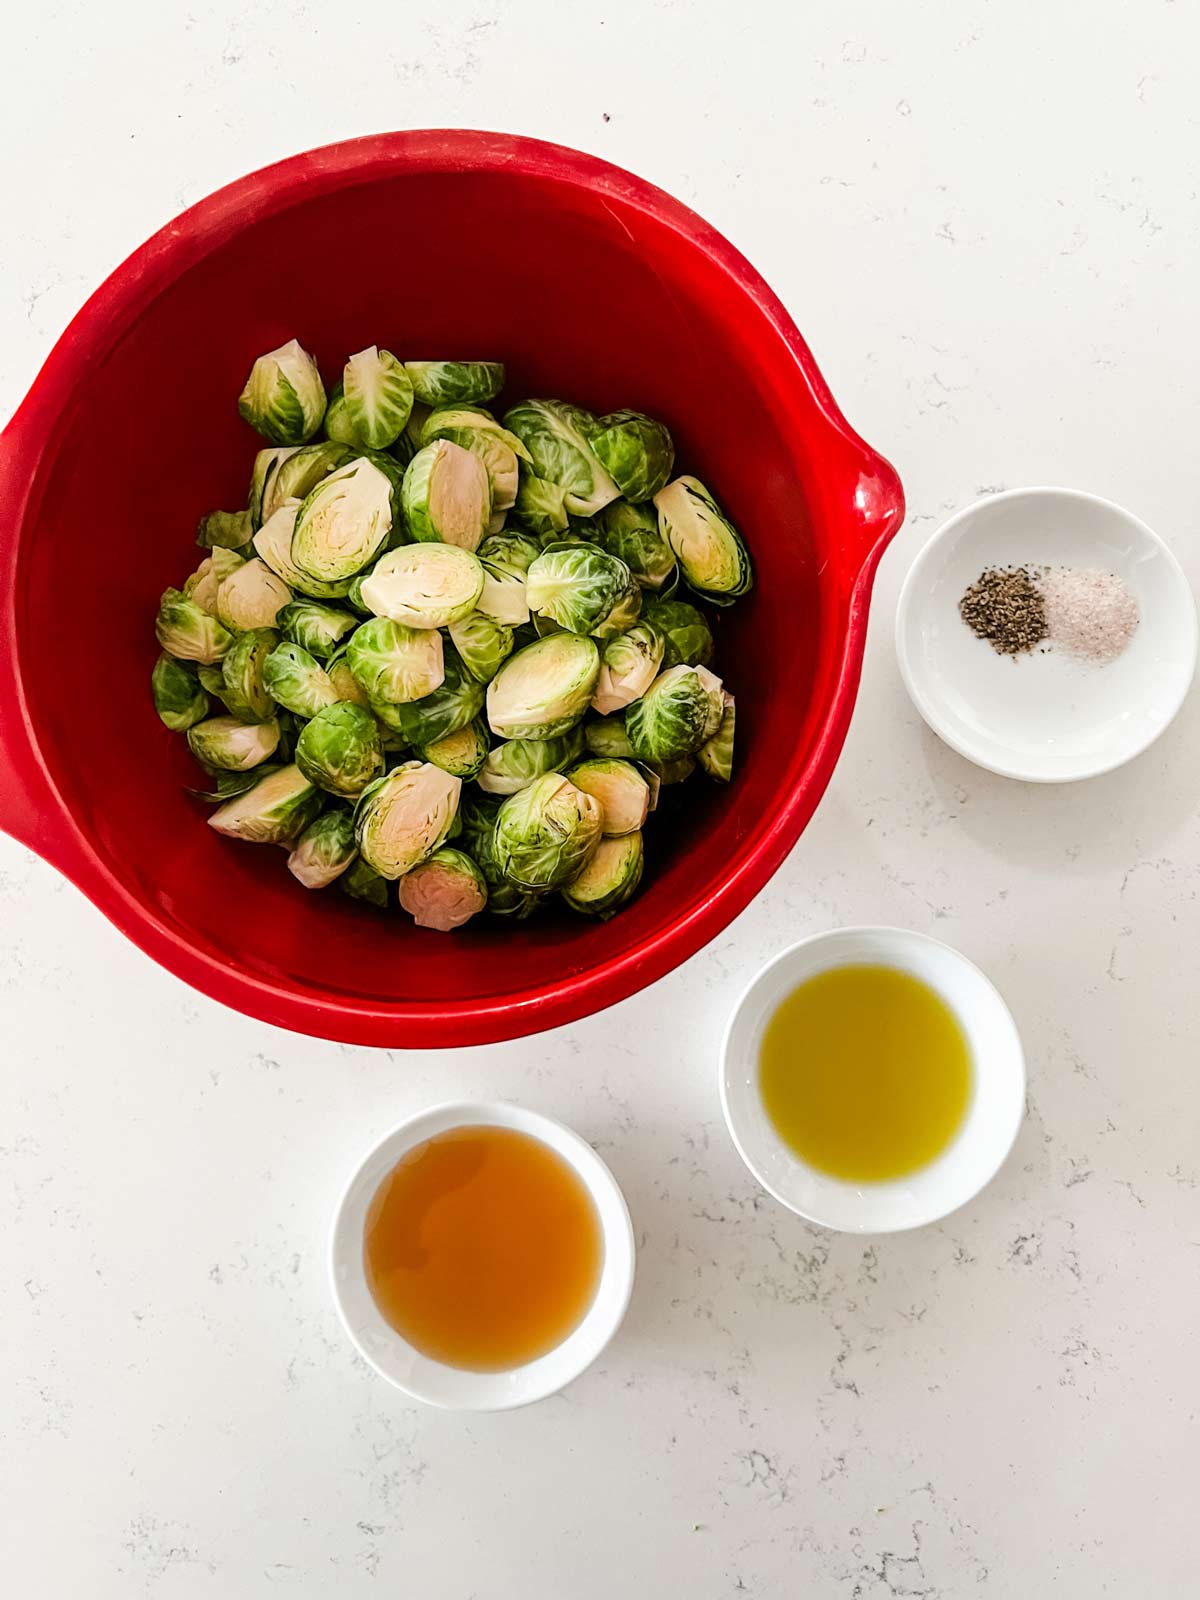 Overhead photo of brussels sprouts in a red bowl with small dishes of maple syrup, oil, and seasonings next to it.